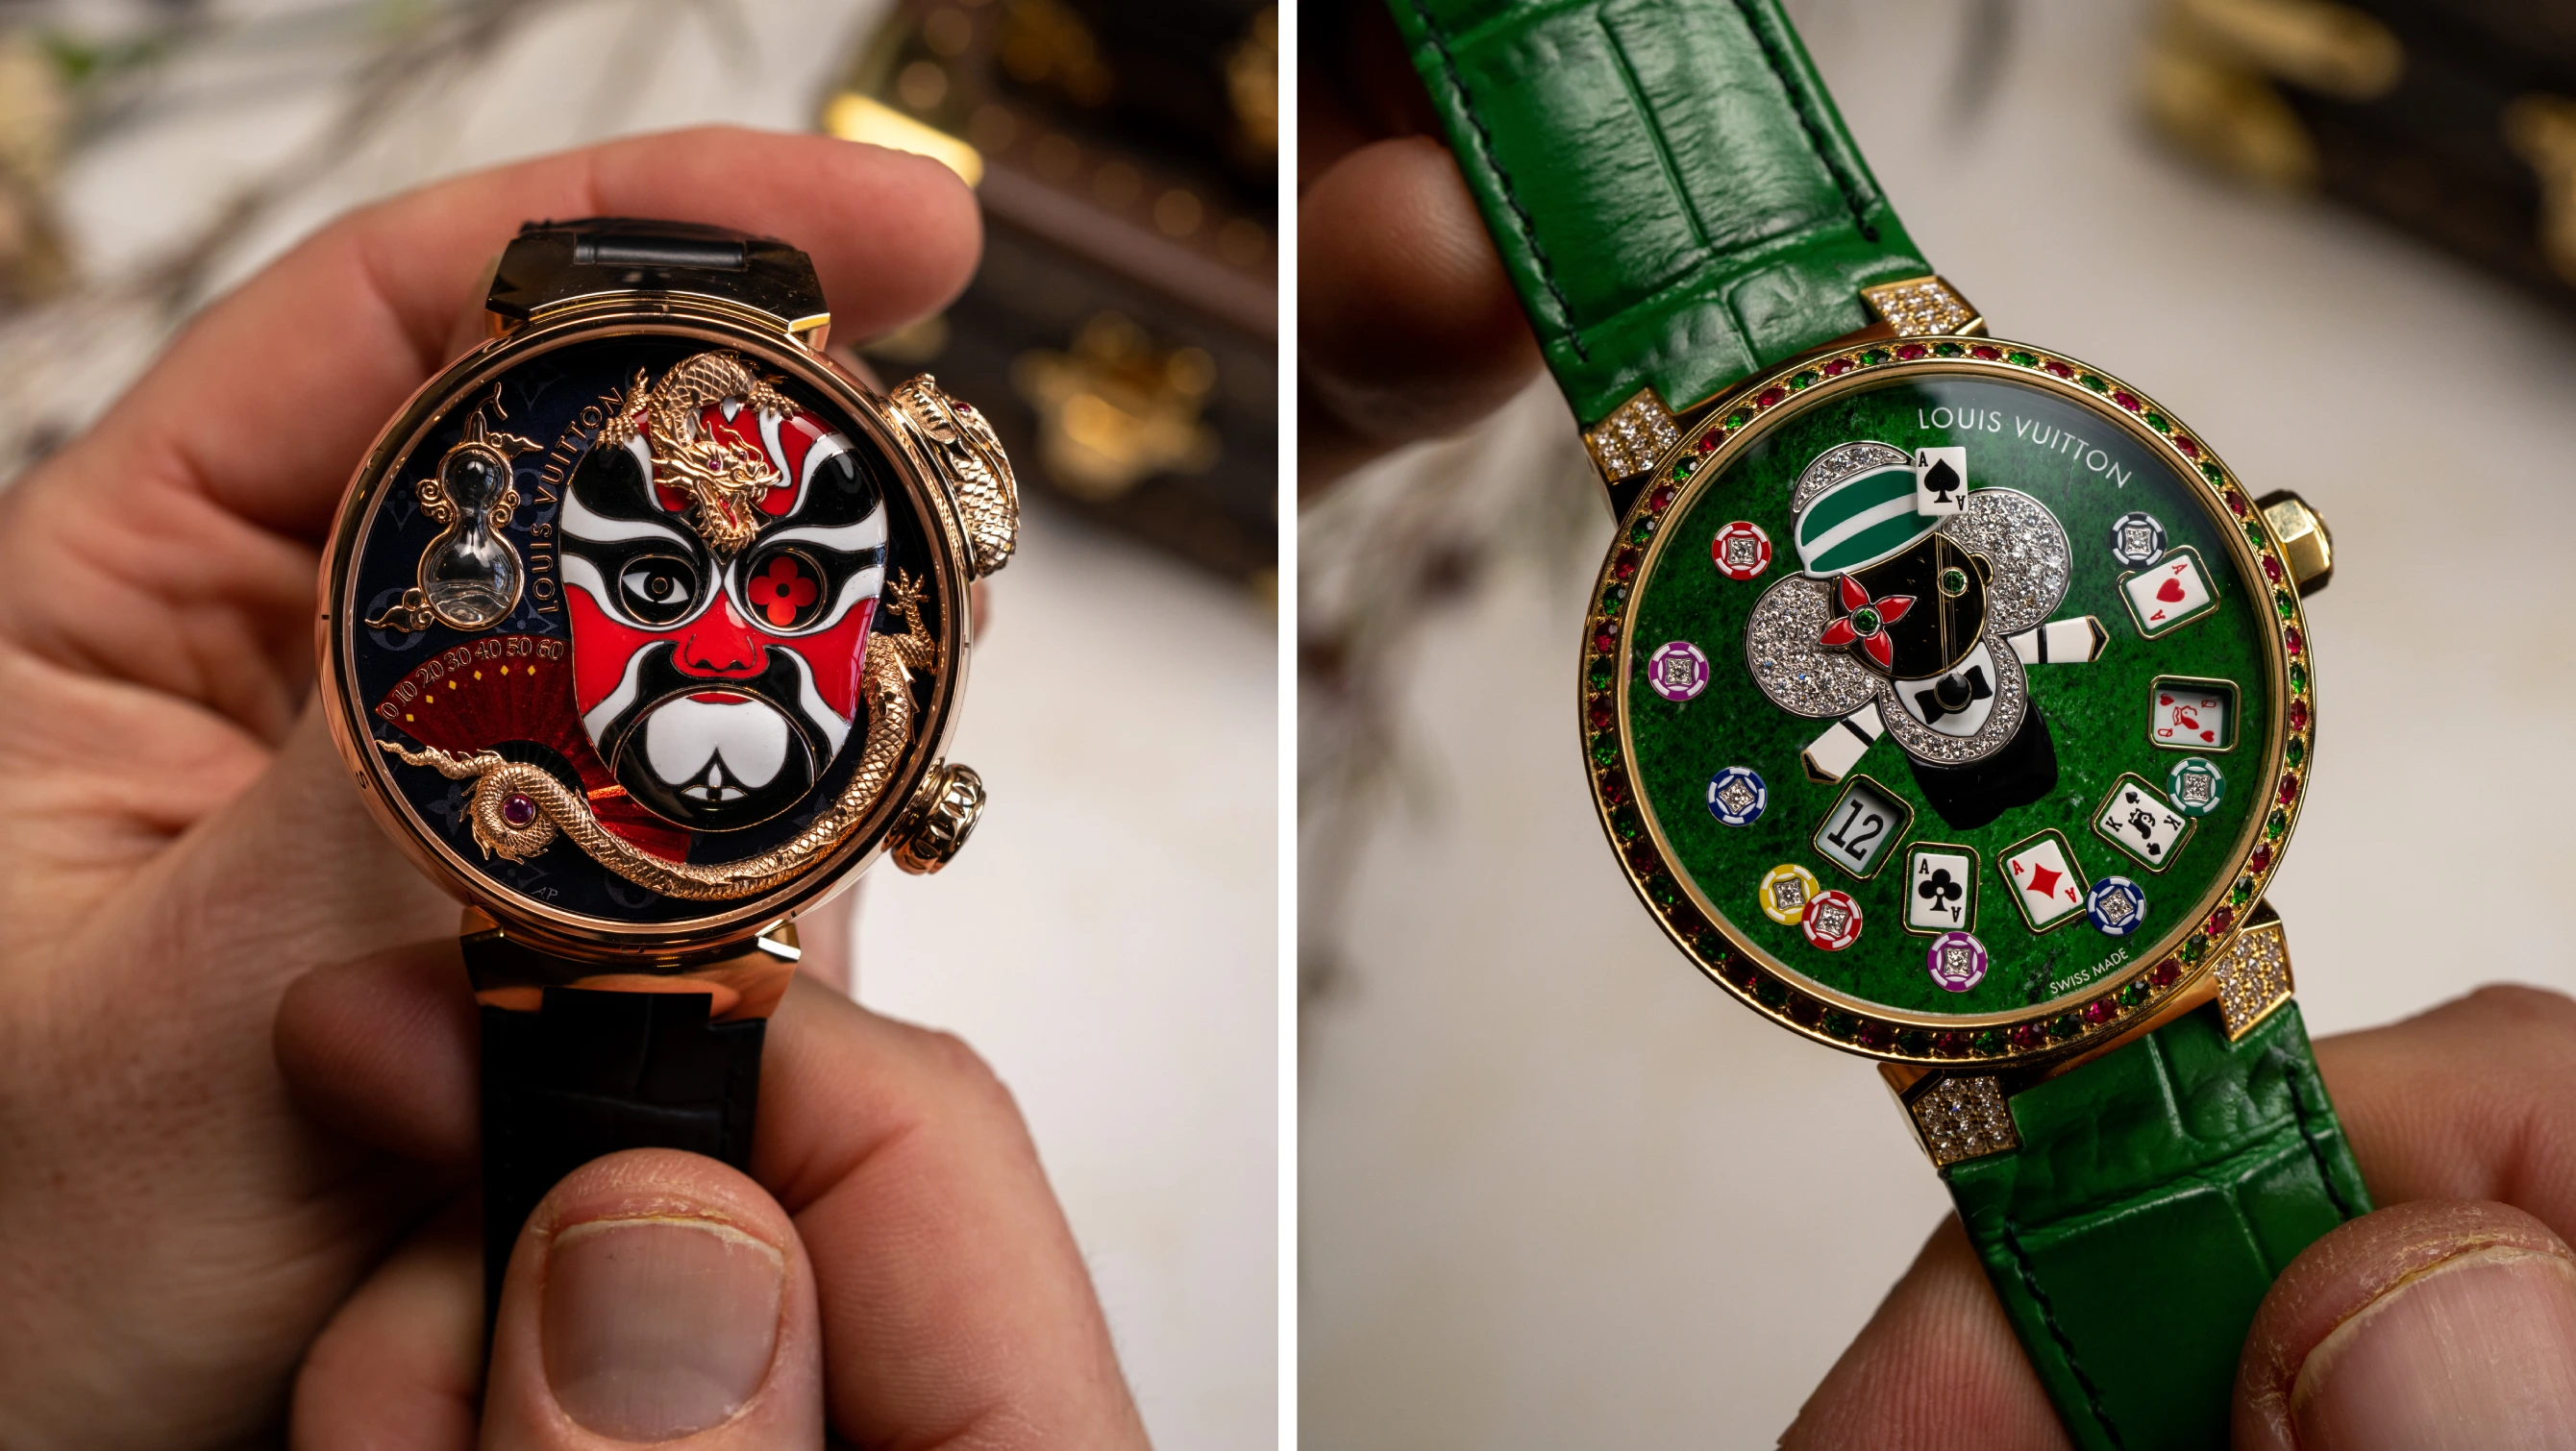 Andrew explores two pieces of Louis Vuitton’s horological art